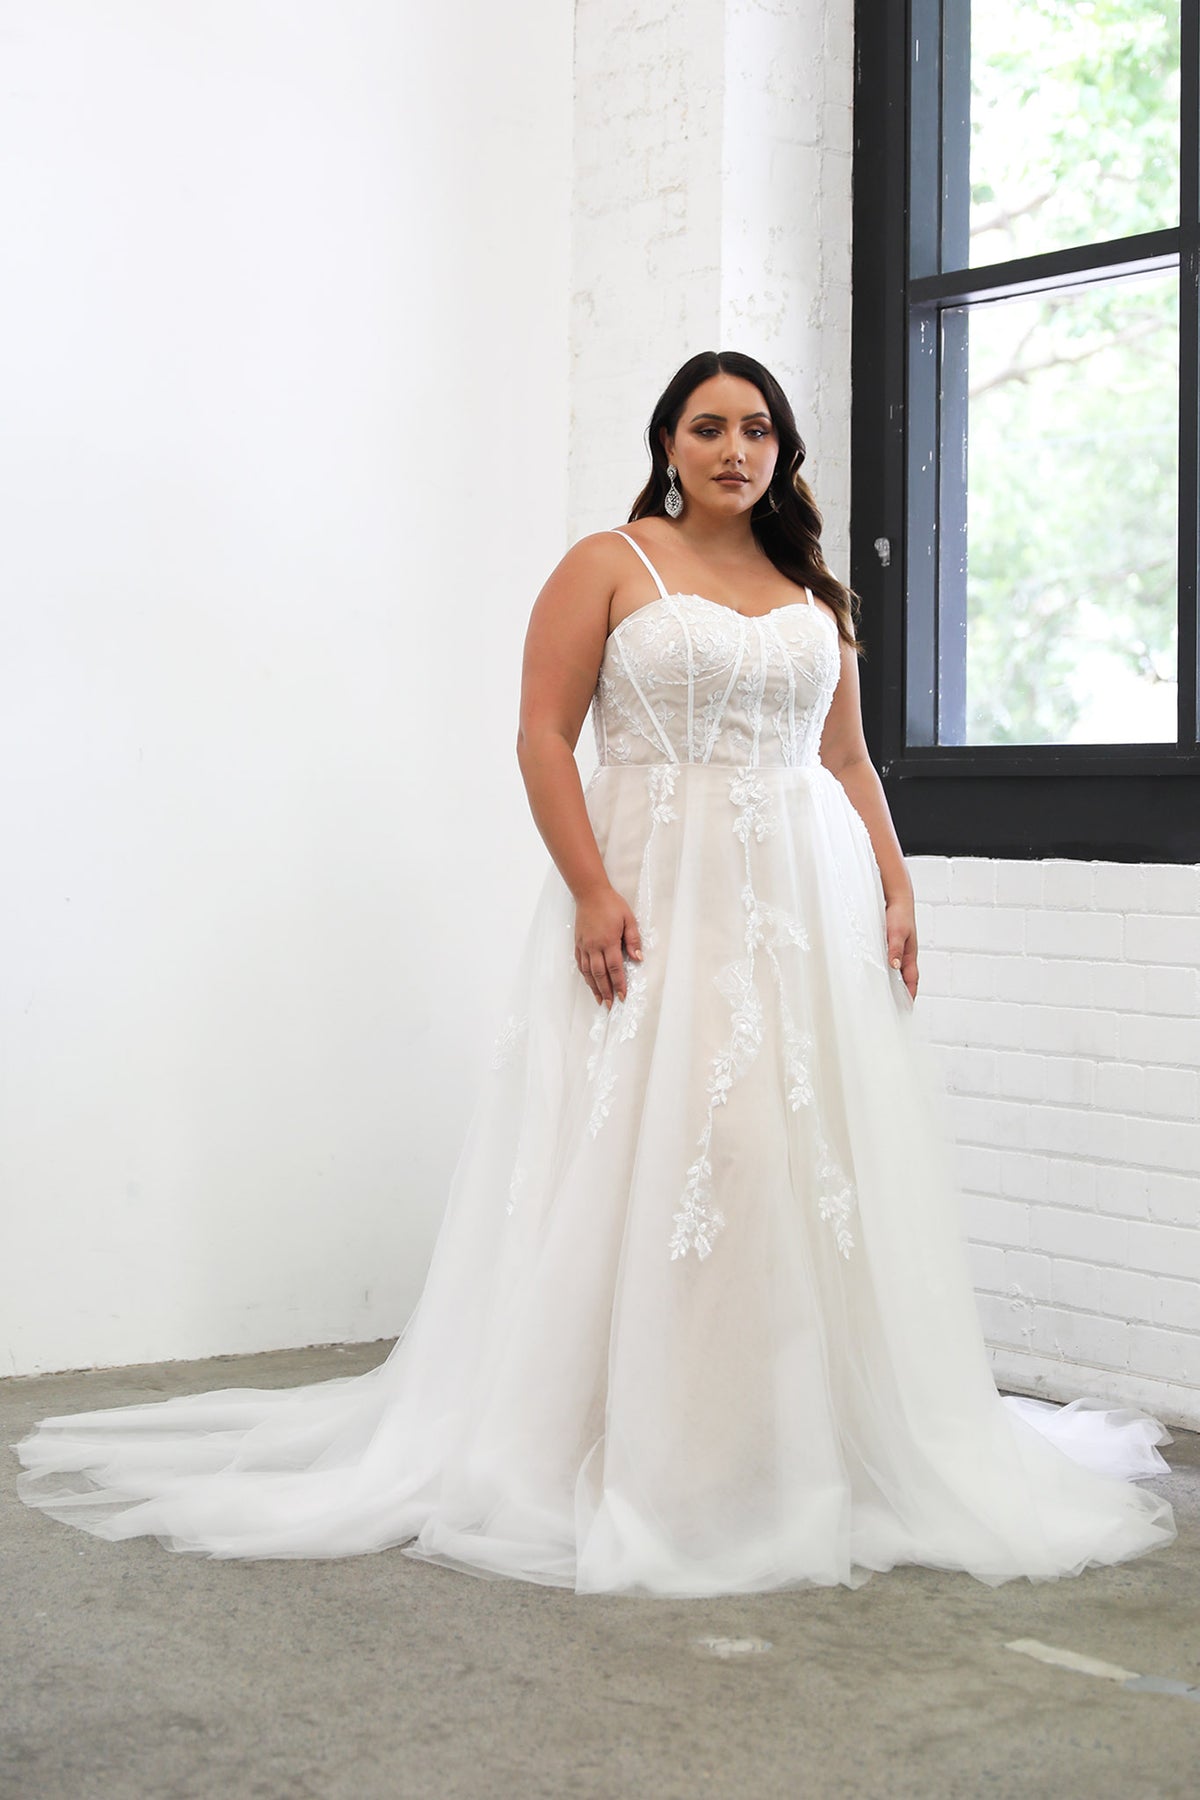 Plus Size Ivory Off White Lace A-line Wedding Gown with Floral and Vine-like Lace Motifs Embellished on Layered Tulle, Trendy Exposed Bone Bodice, Voluminous Full A-line Skirt and Flowing Sweep Train